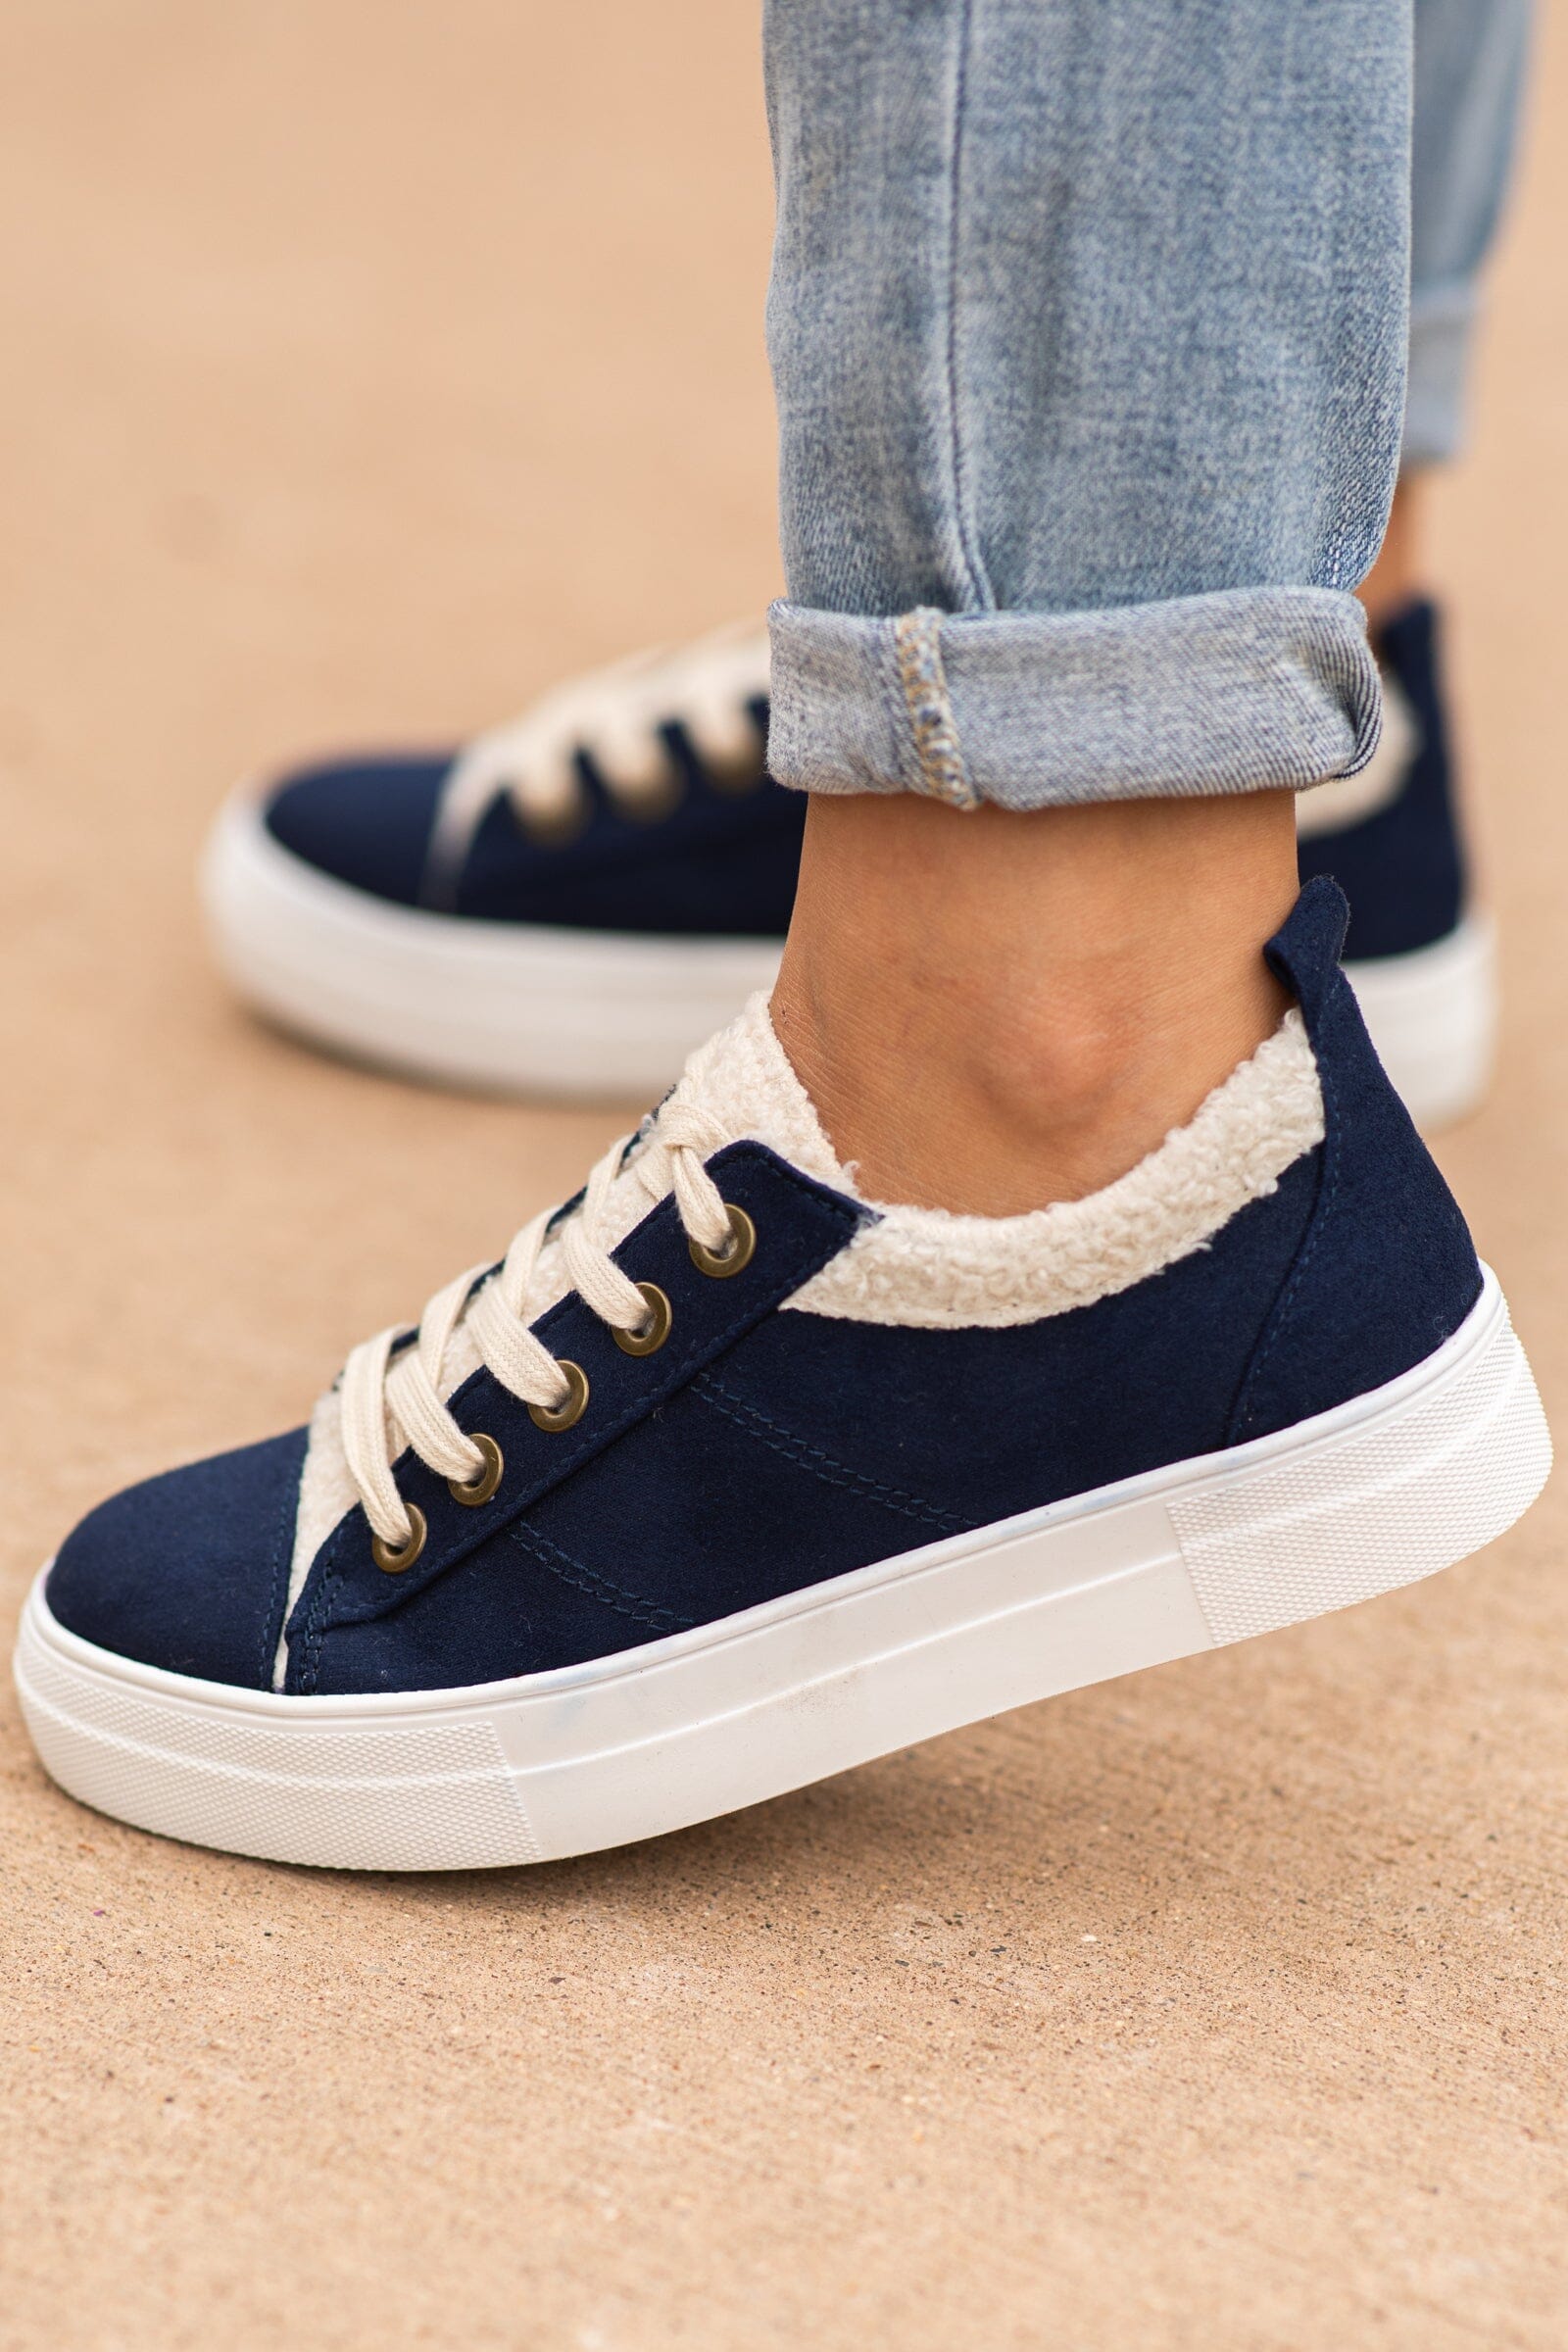 Navy and Beige Lace Up Sneakers - Filly Flair